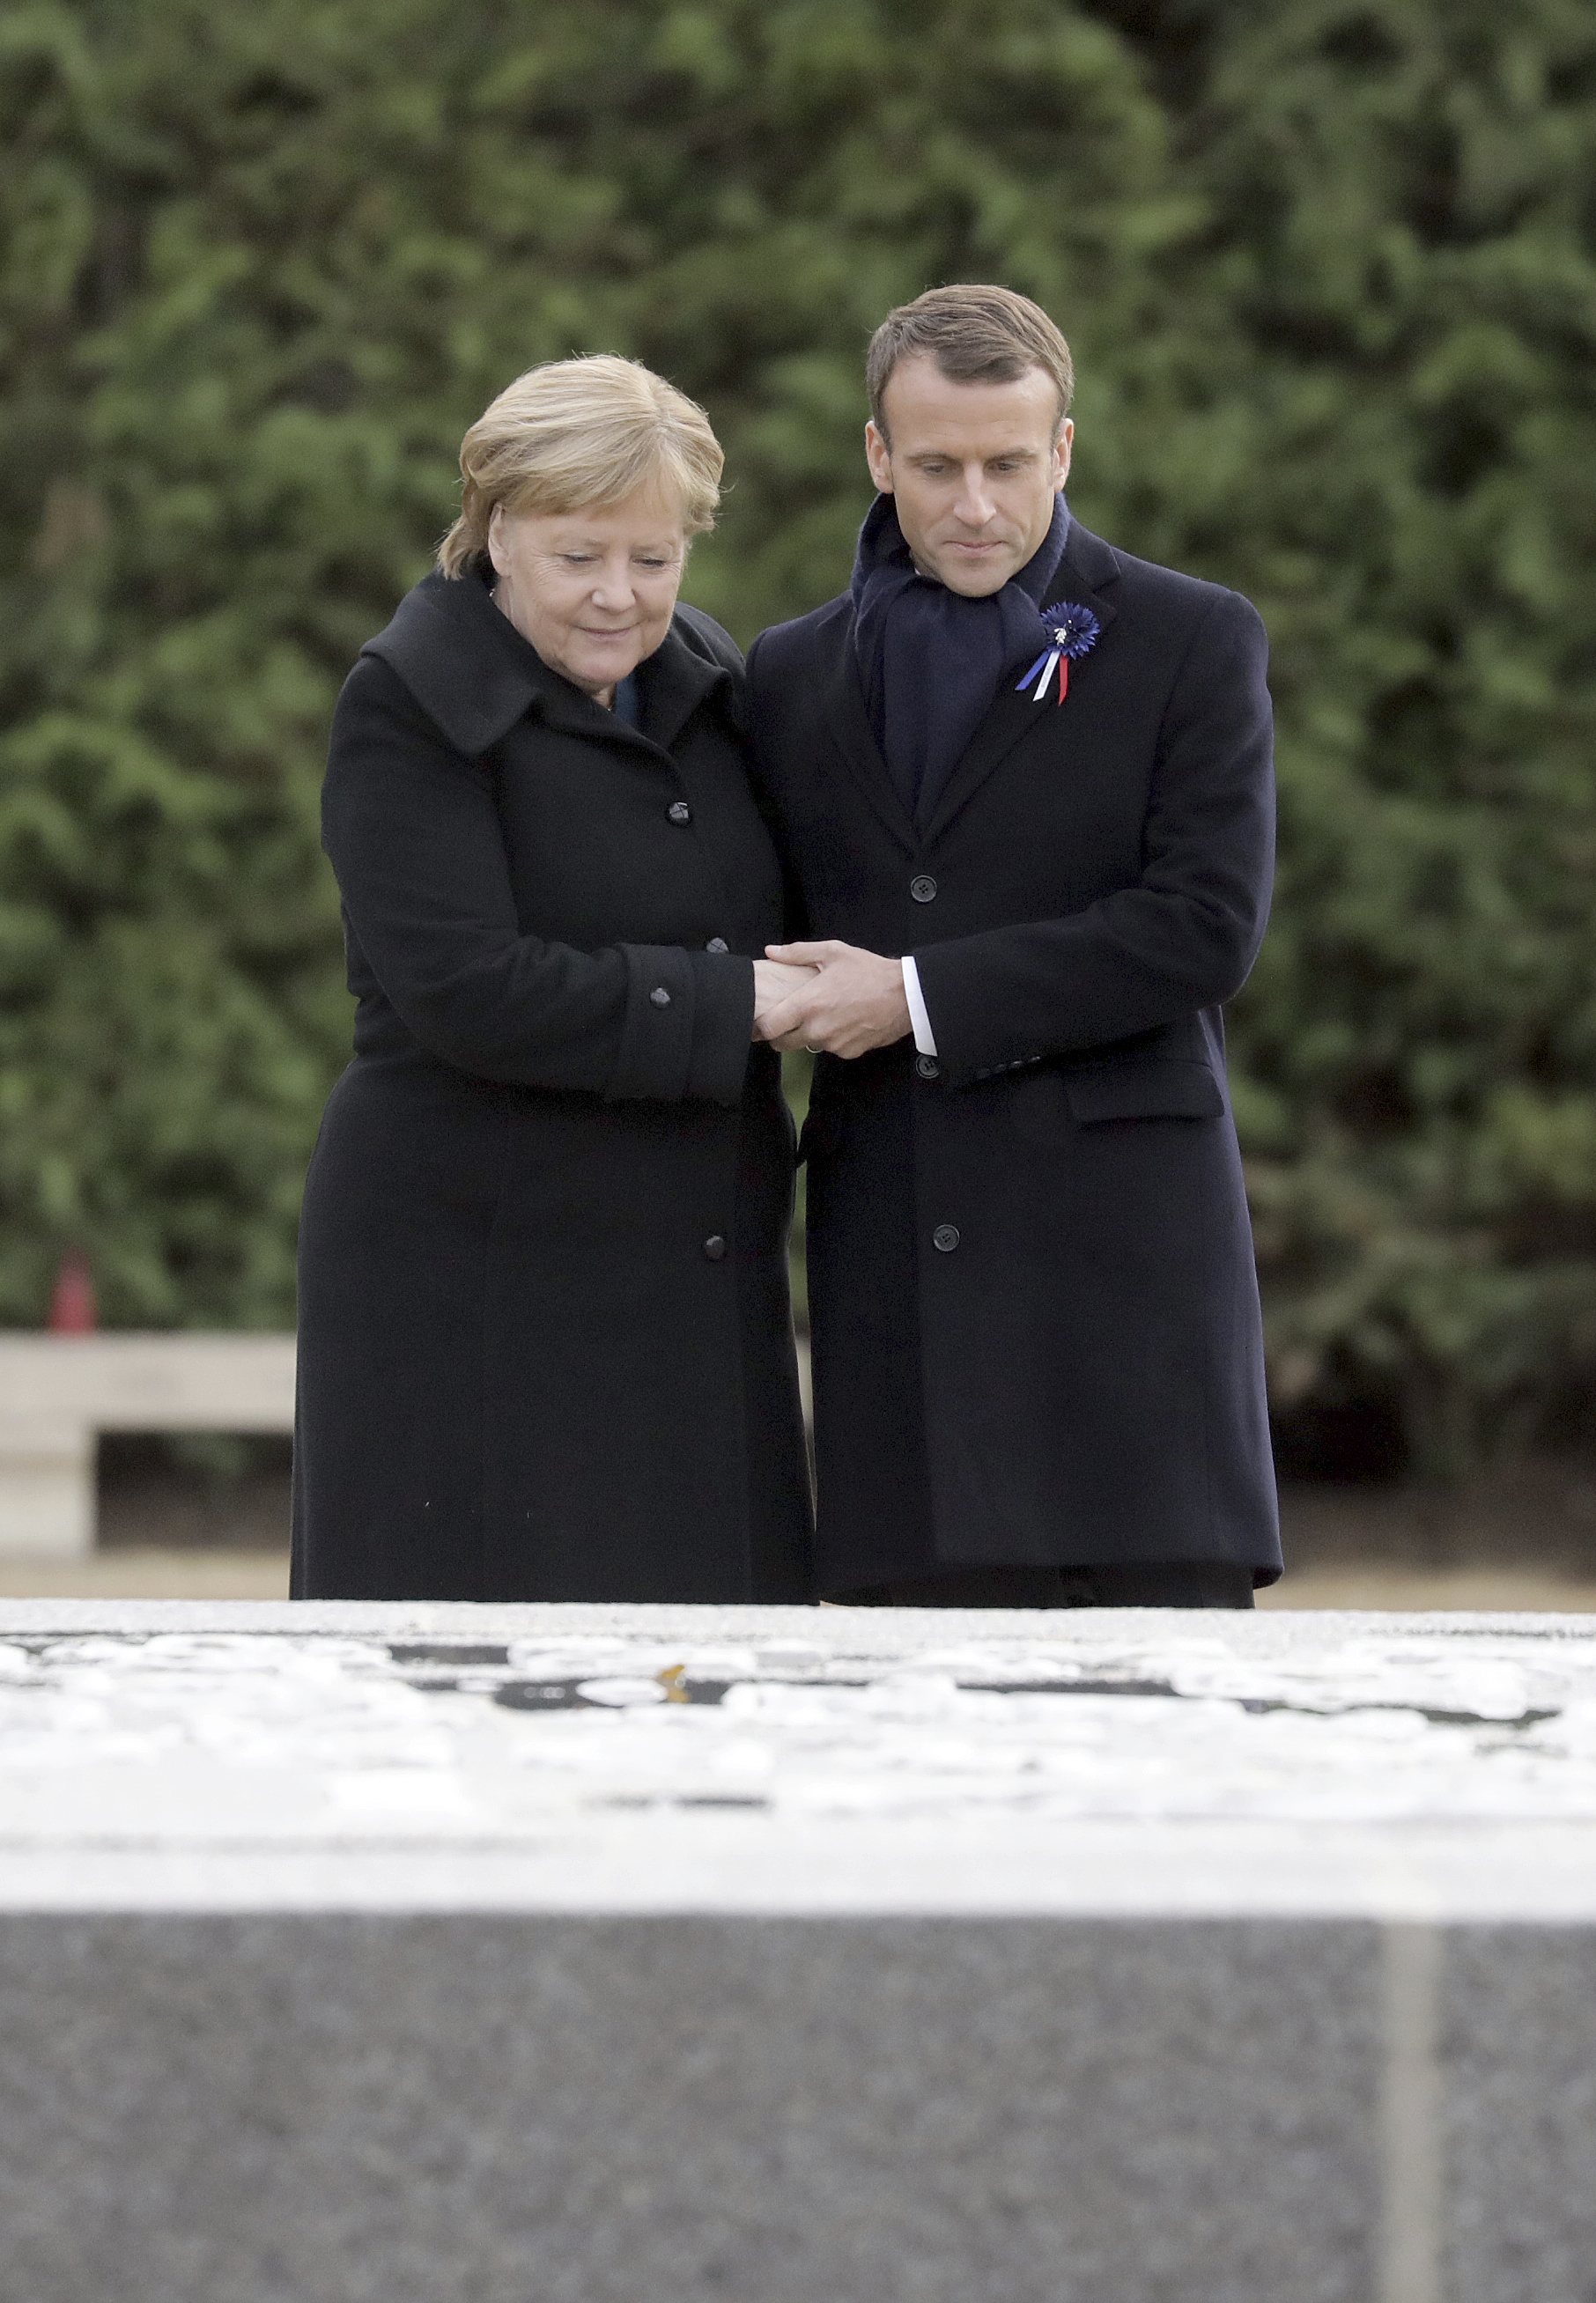 10 November 2018, France, Compiegne: German Chancellor Angela Merkel (CDU) and French President Emmanuel Macron commemorate the end of the First World War 100 years ago near the northern French town of Compi'gne. The armistice was signed on 11 November 1918 in a converted dining car in the clearing. The memorial is located on this site. Photo by: Kay Nietfeld/picture-alliance/dpa/AP Images